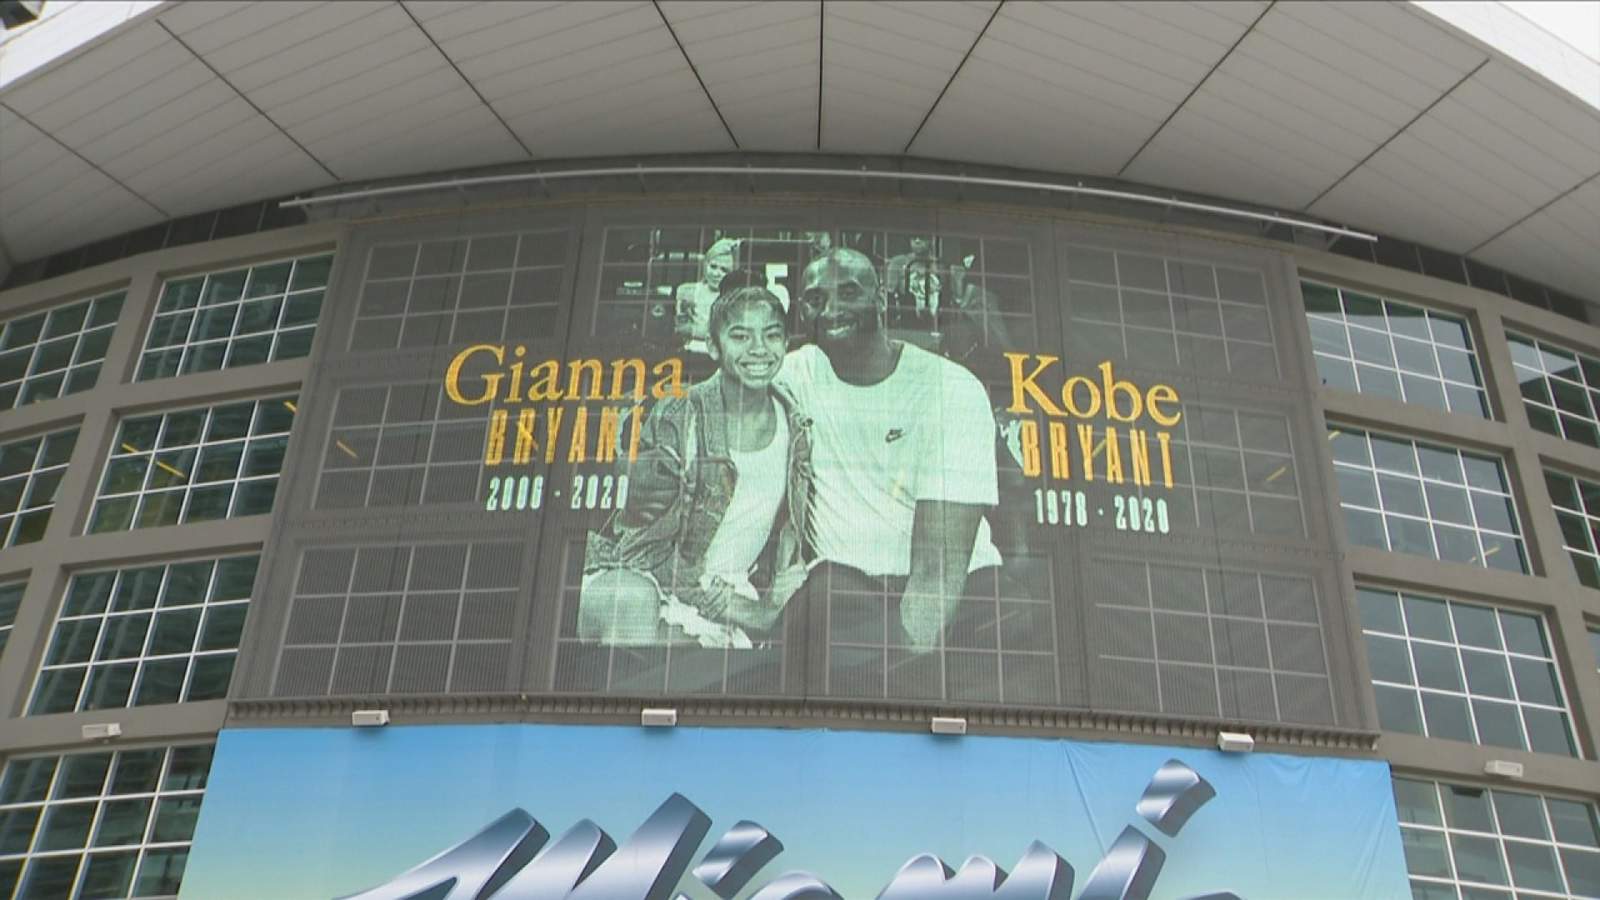 Heat honors Kobe, plays video on front of AAA